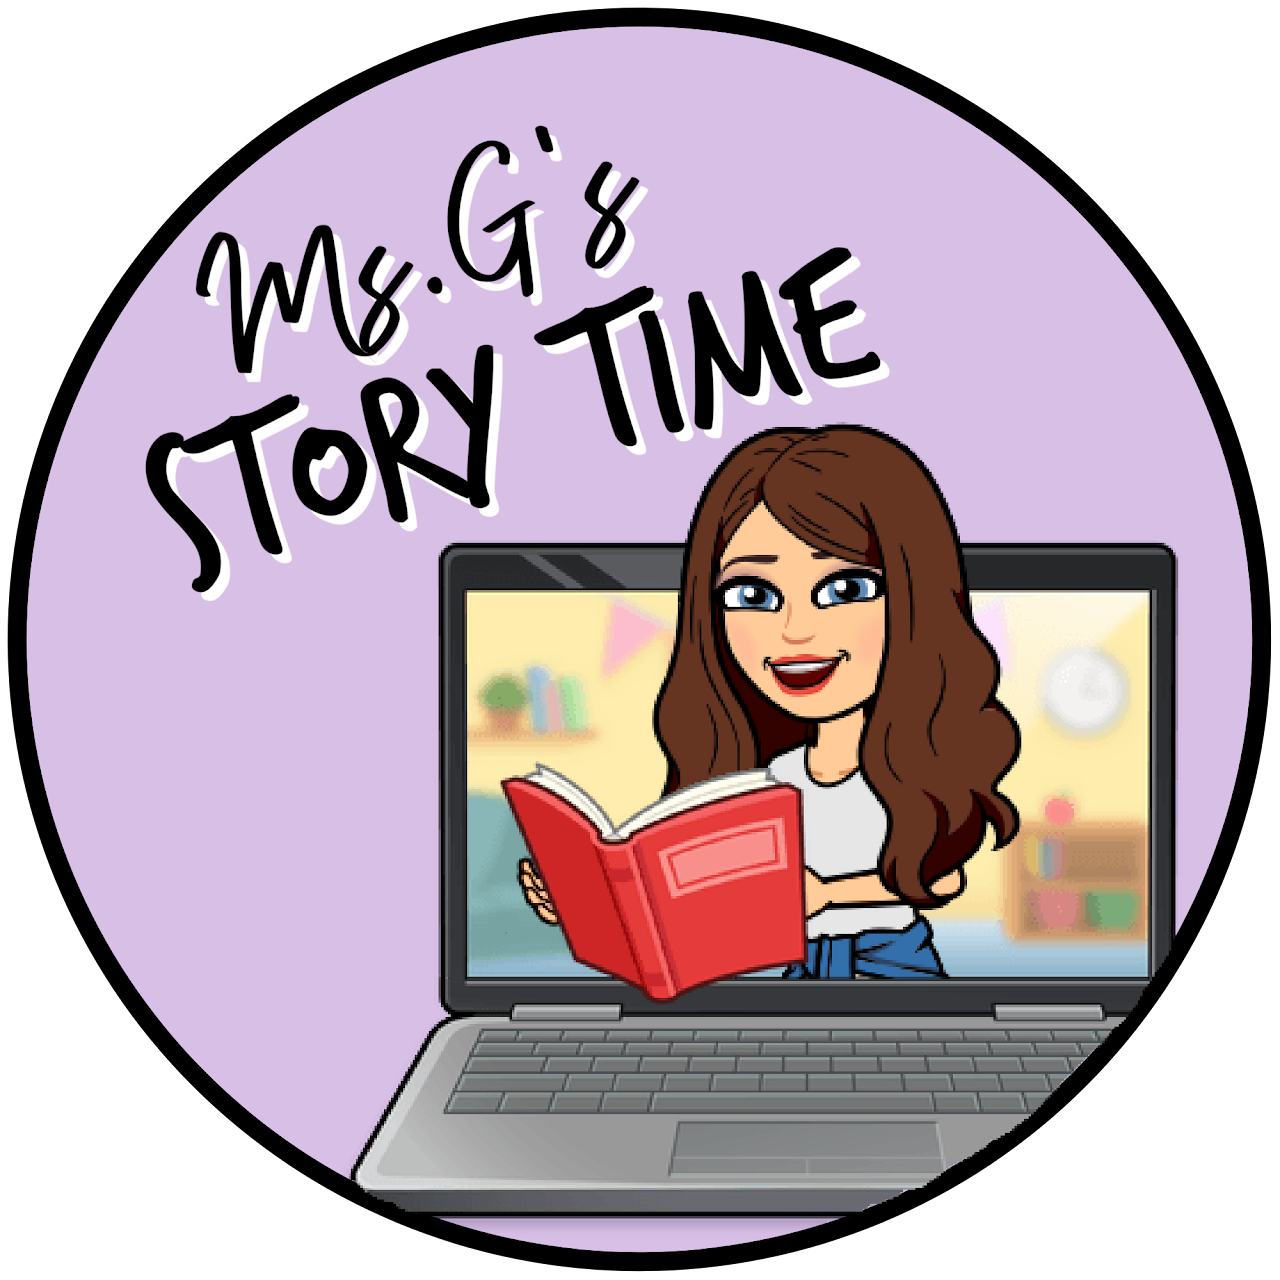 Ms. G's Story Time Link